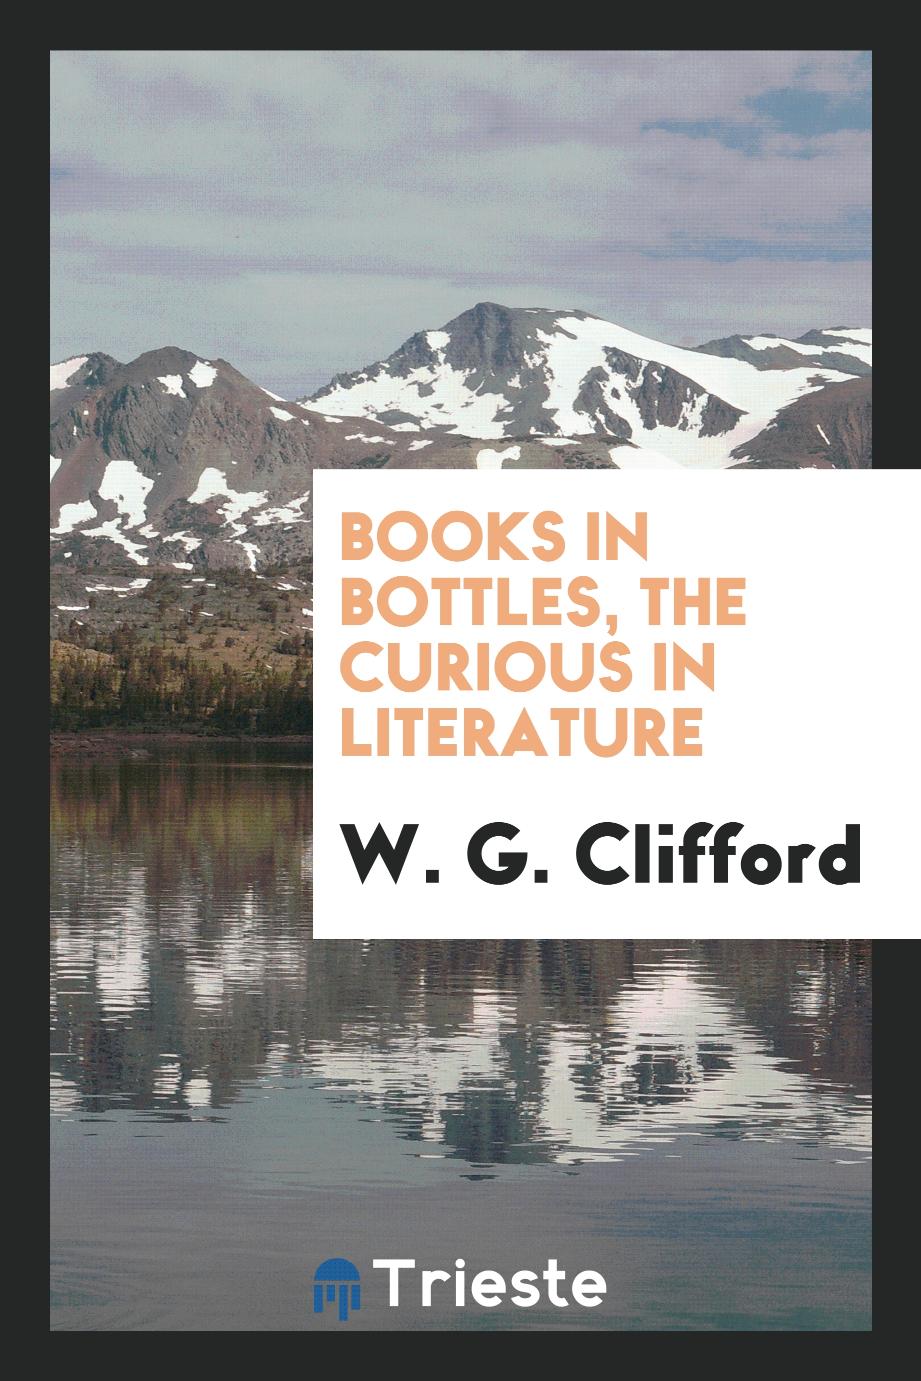 Books in bottles, the curious in literature